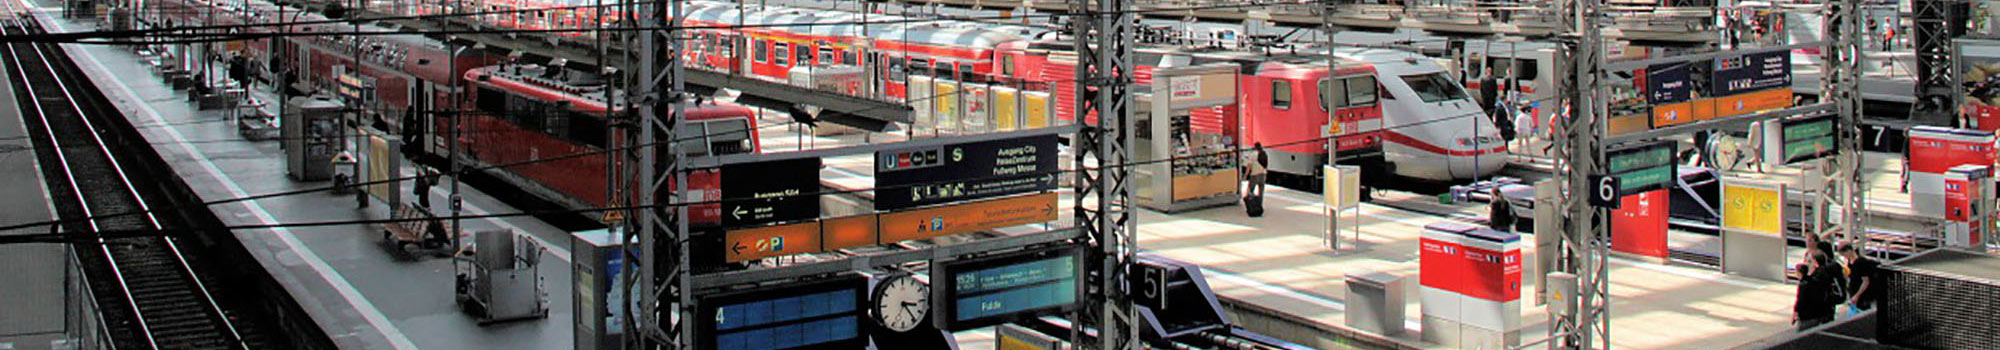 Making railway stations electrically safe